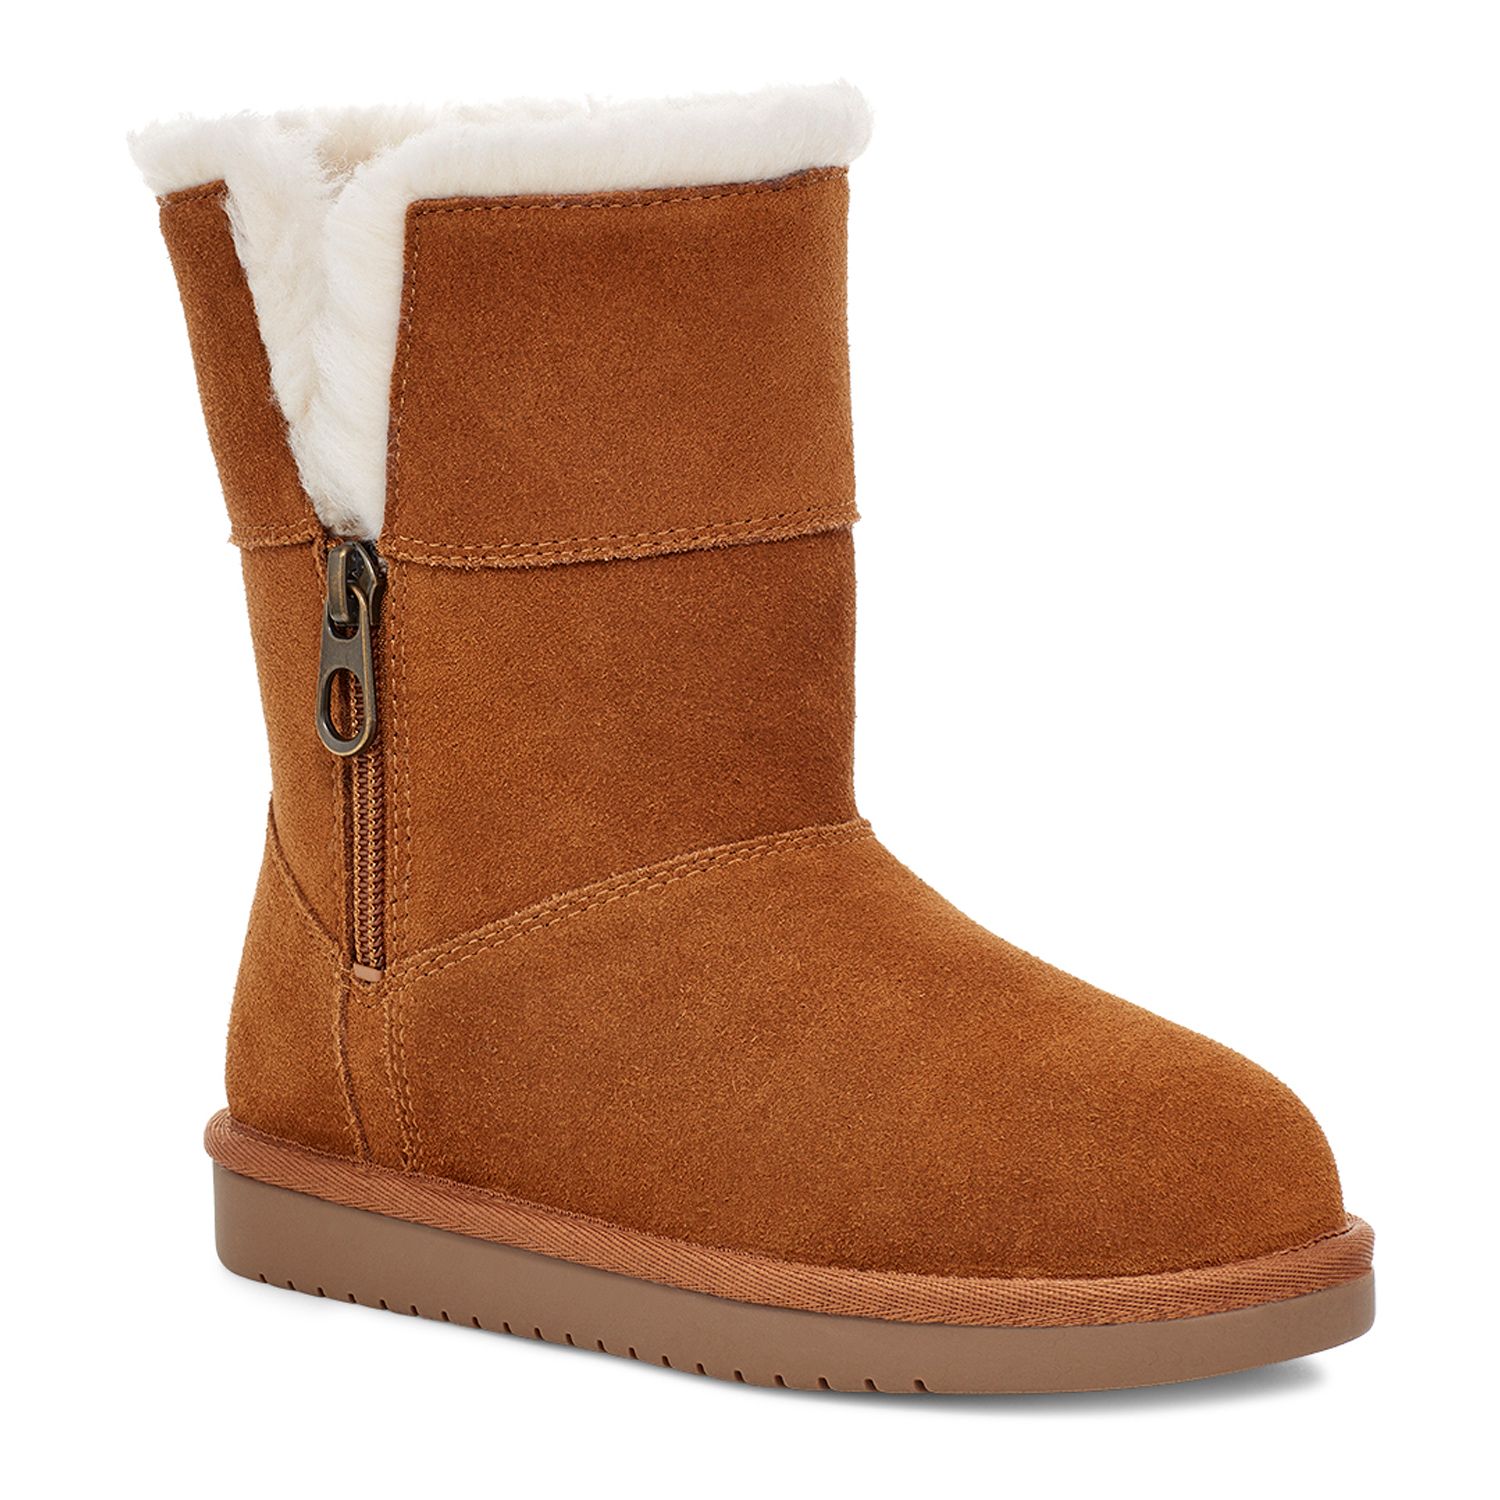 does walmart sell uggs